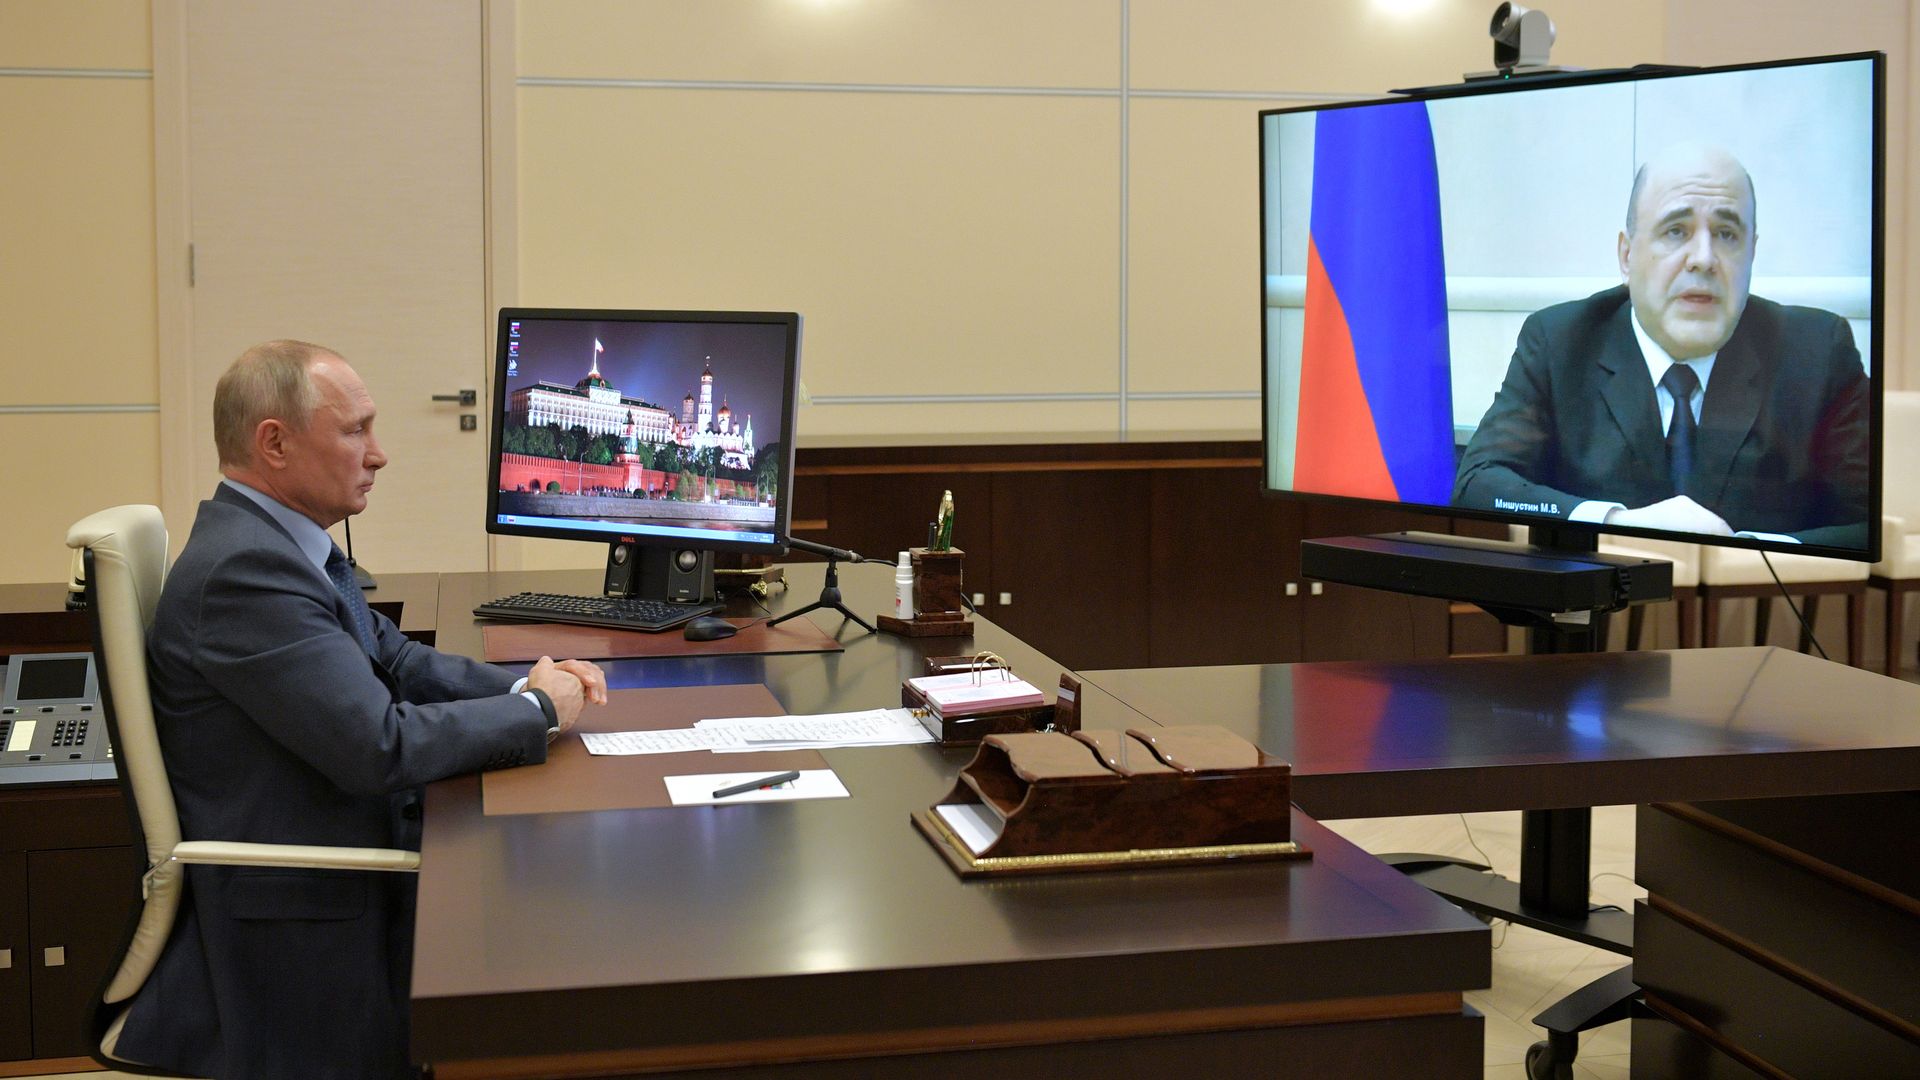 In this image, Putin and the prime minister have a telemeeting